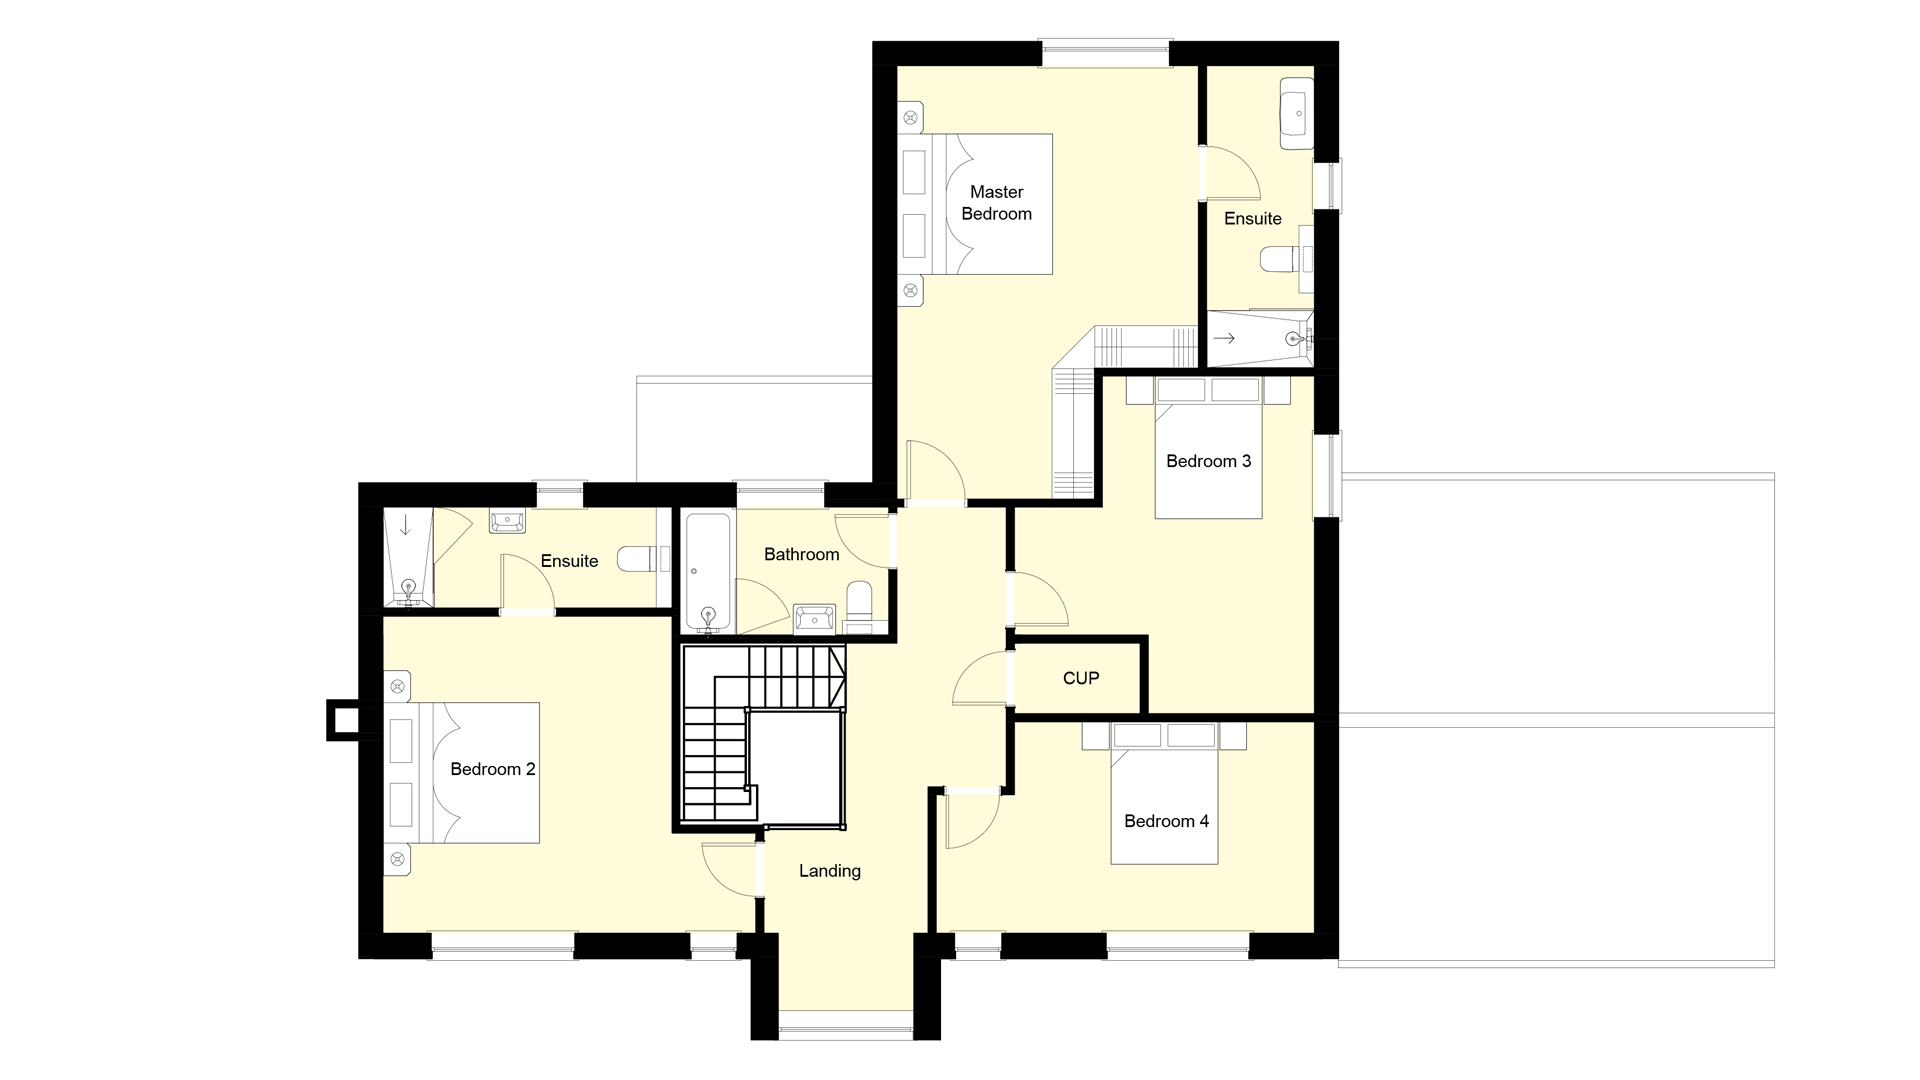 Layout of the first floor at Plot 12 Weavers park.